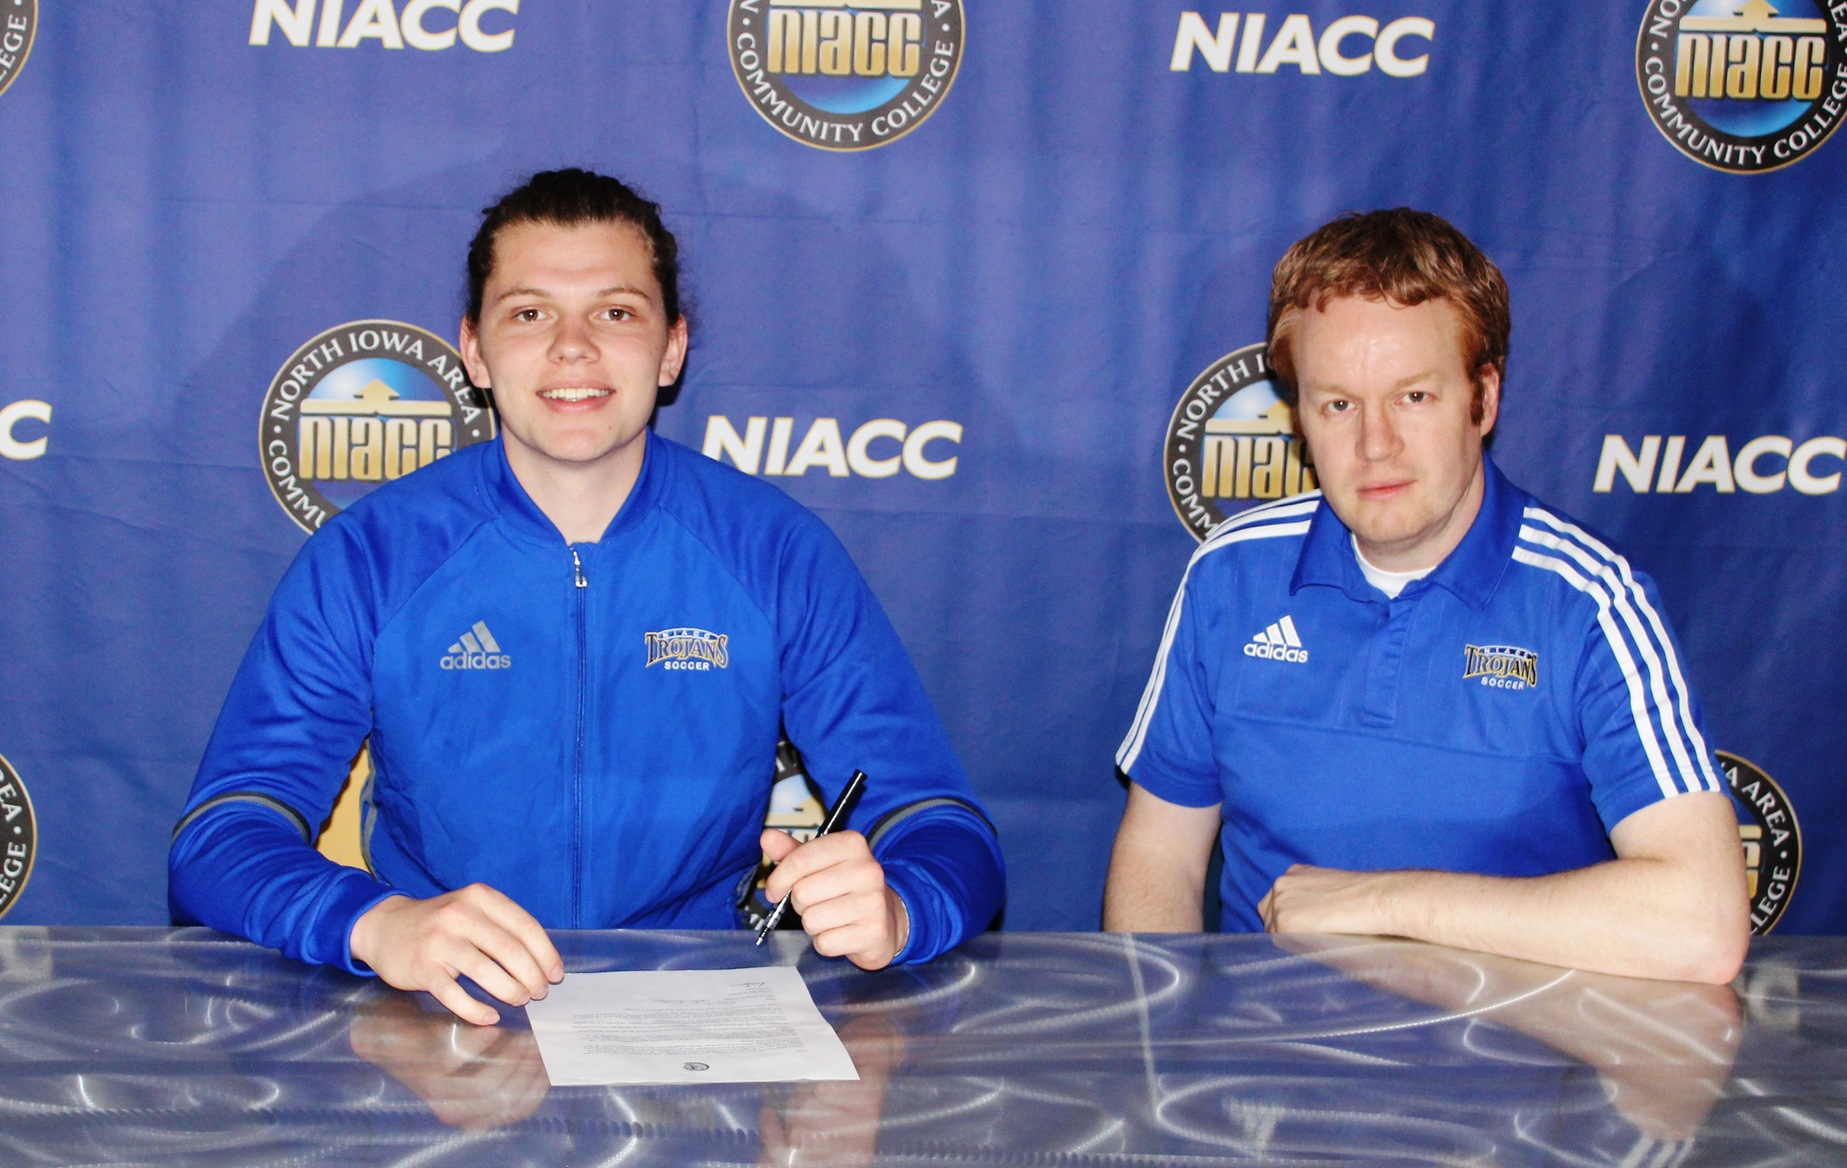 NIACC sophomore keeper Colin Anderson signed national letter of intent Thursday to play at Lander University.